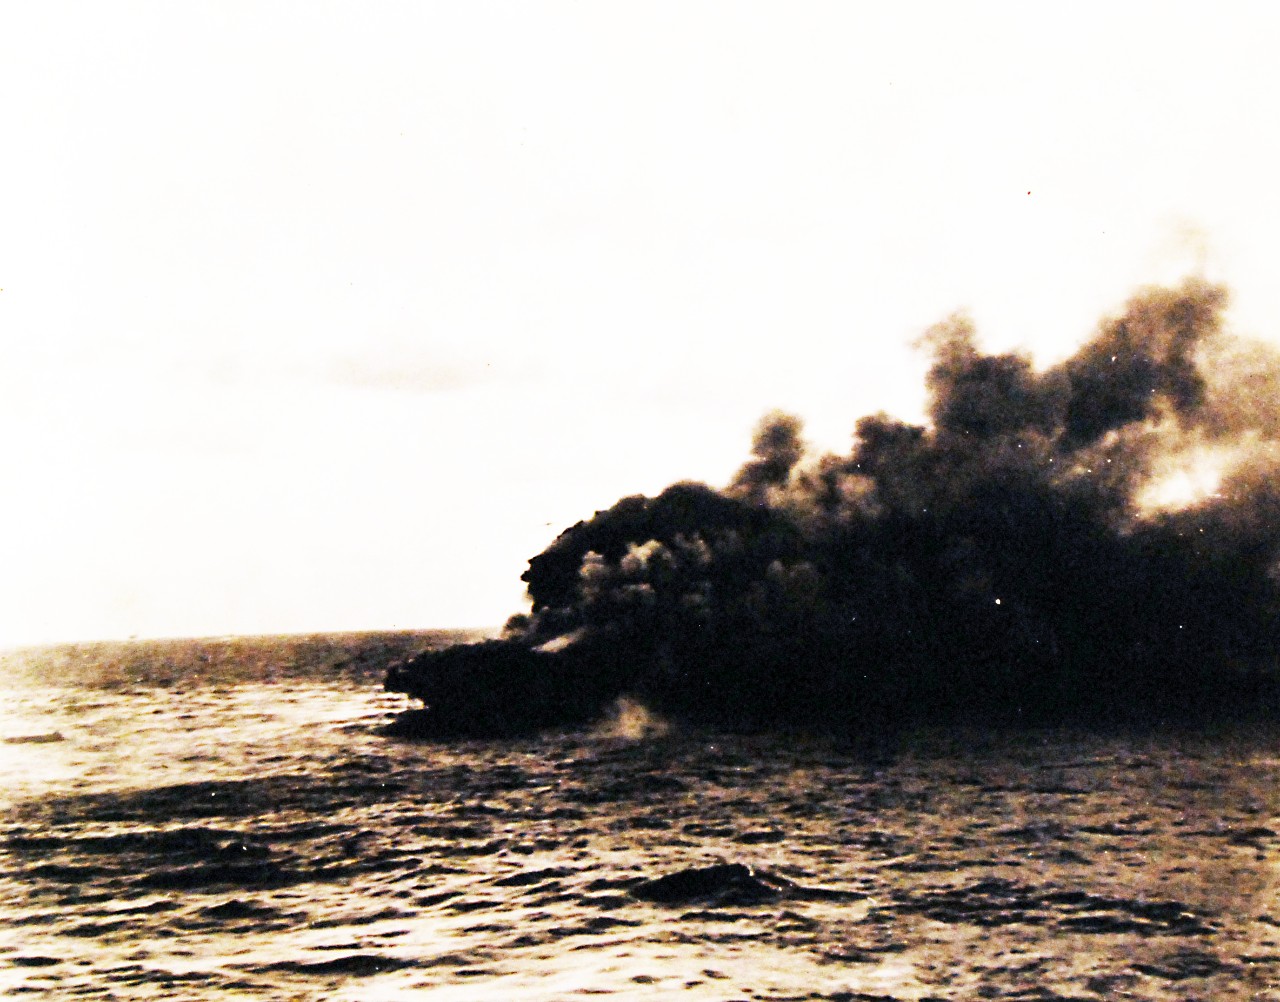 80-G-16642:   Battle of the Coral Sea, May 1942.    USS Lexington (CV 2) on fire following the Battle of the Coral Sea, 8 May 1942.   Ship is burning after explosion.  Survivors are picked up while Captain Sherman is still on board.  Official U.S. Navy Photograph, now in the collections of the National Archives.     (4/10/2014).